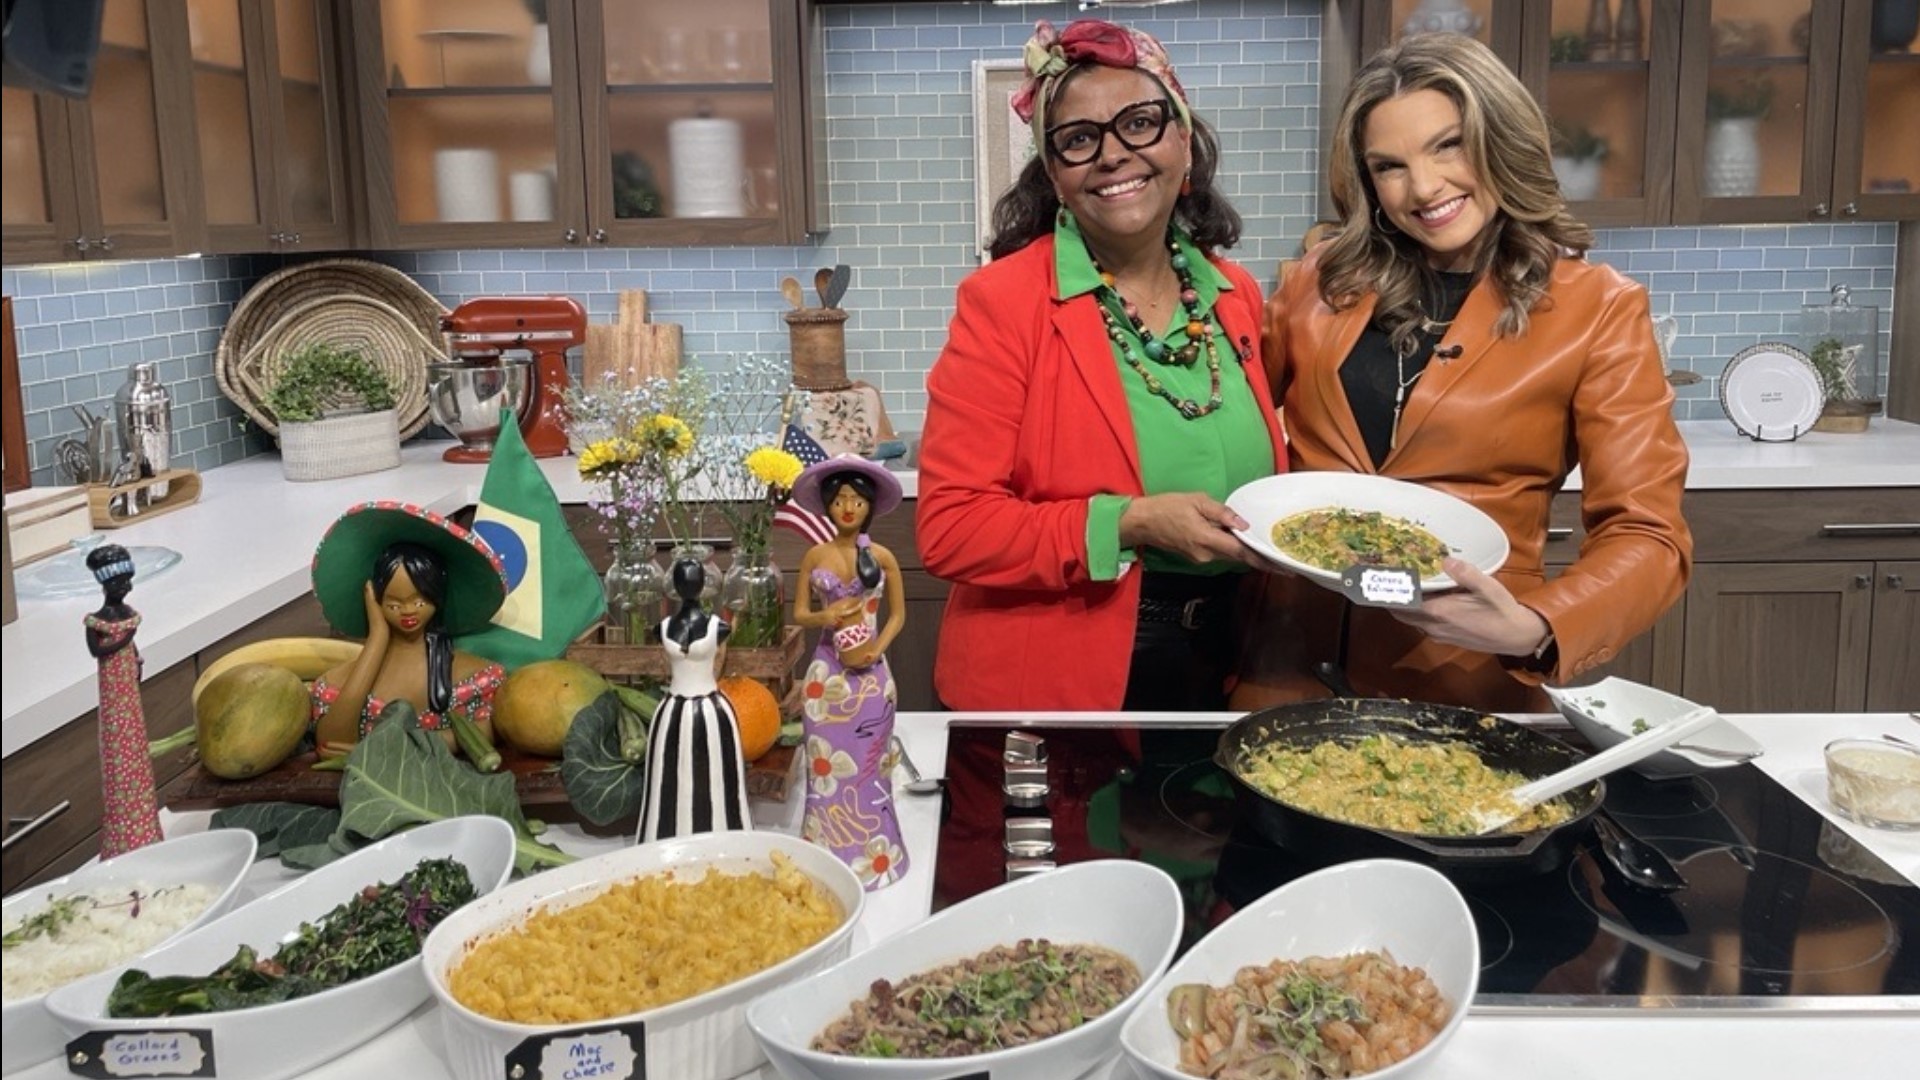 As we close out Black History month, we're paying homage with a delicious dish of Caruru, a shrimp and okra strew by Sandra Rocha Evanoff. #newdaynw